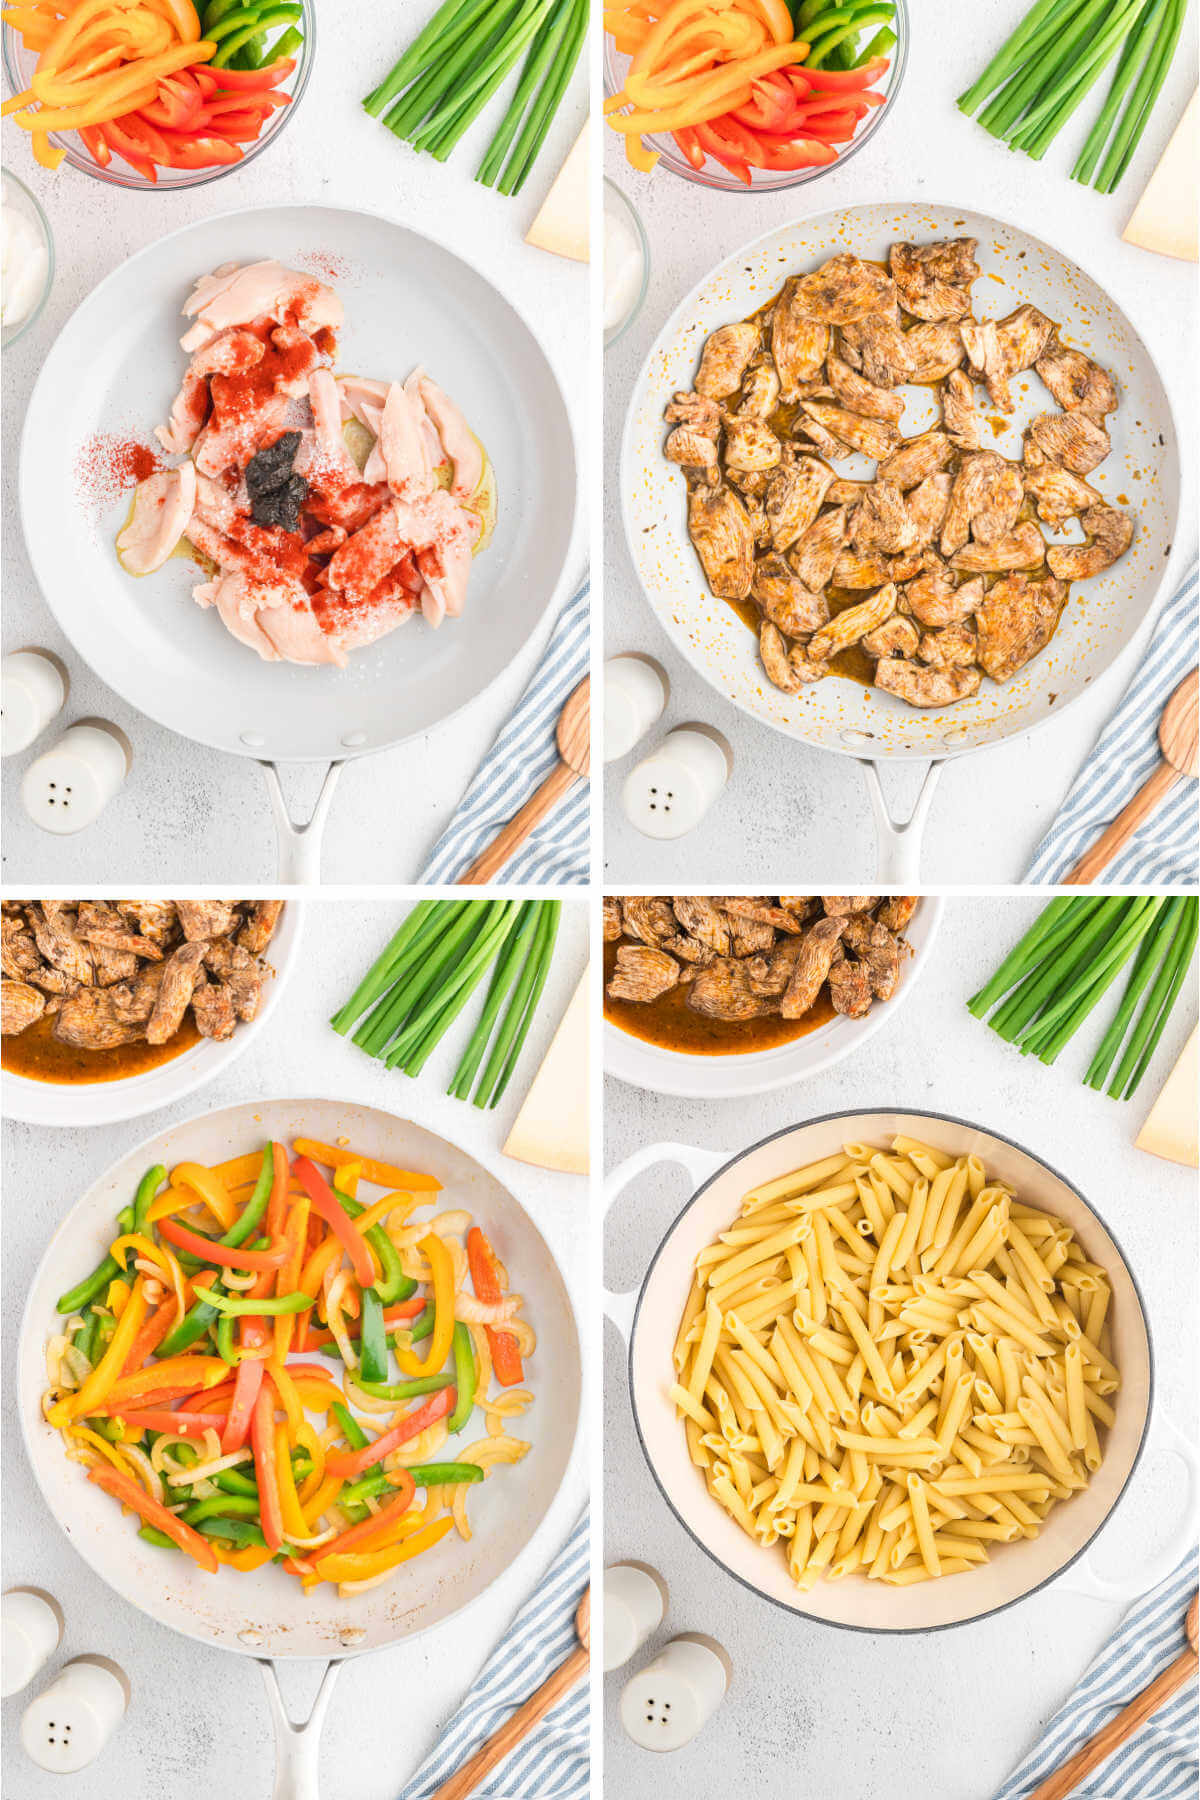 Process steps for making jerk chicken pasta: season the chicken; cook chicken and bell peppers; drain cooked pasta and keep warm.